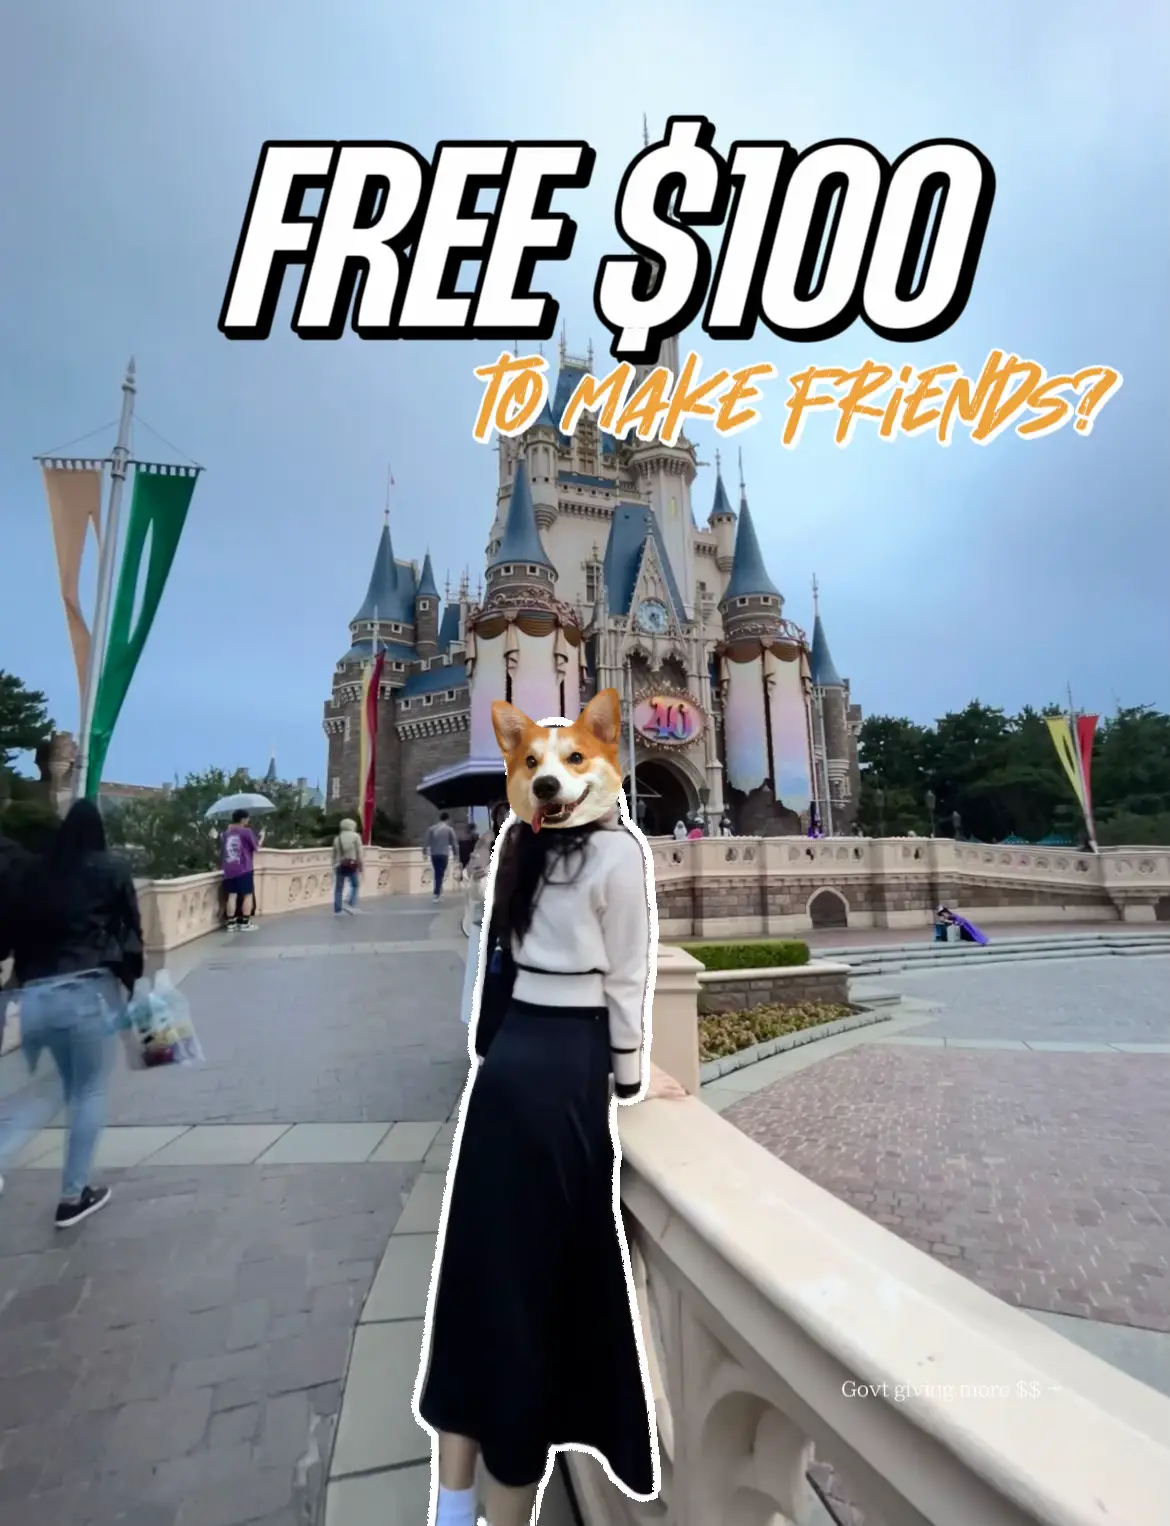 Govt give FREE $100 to make friends?! 's images